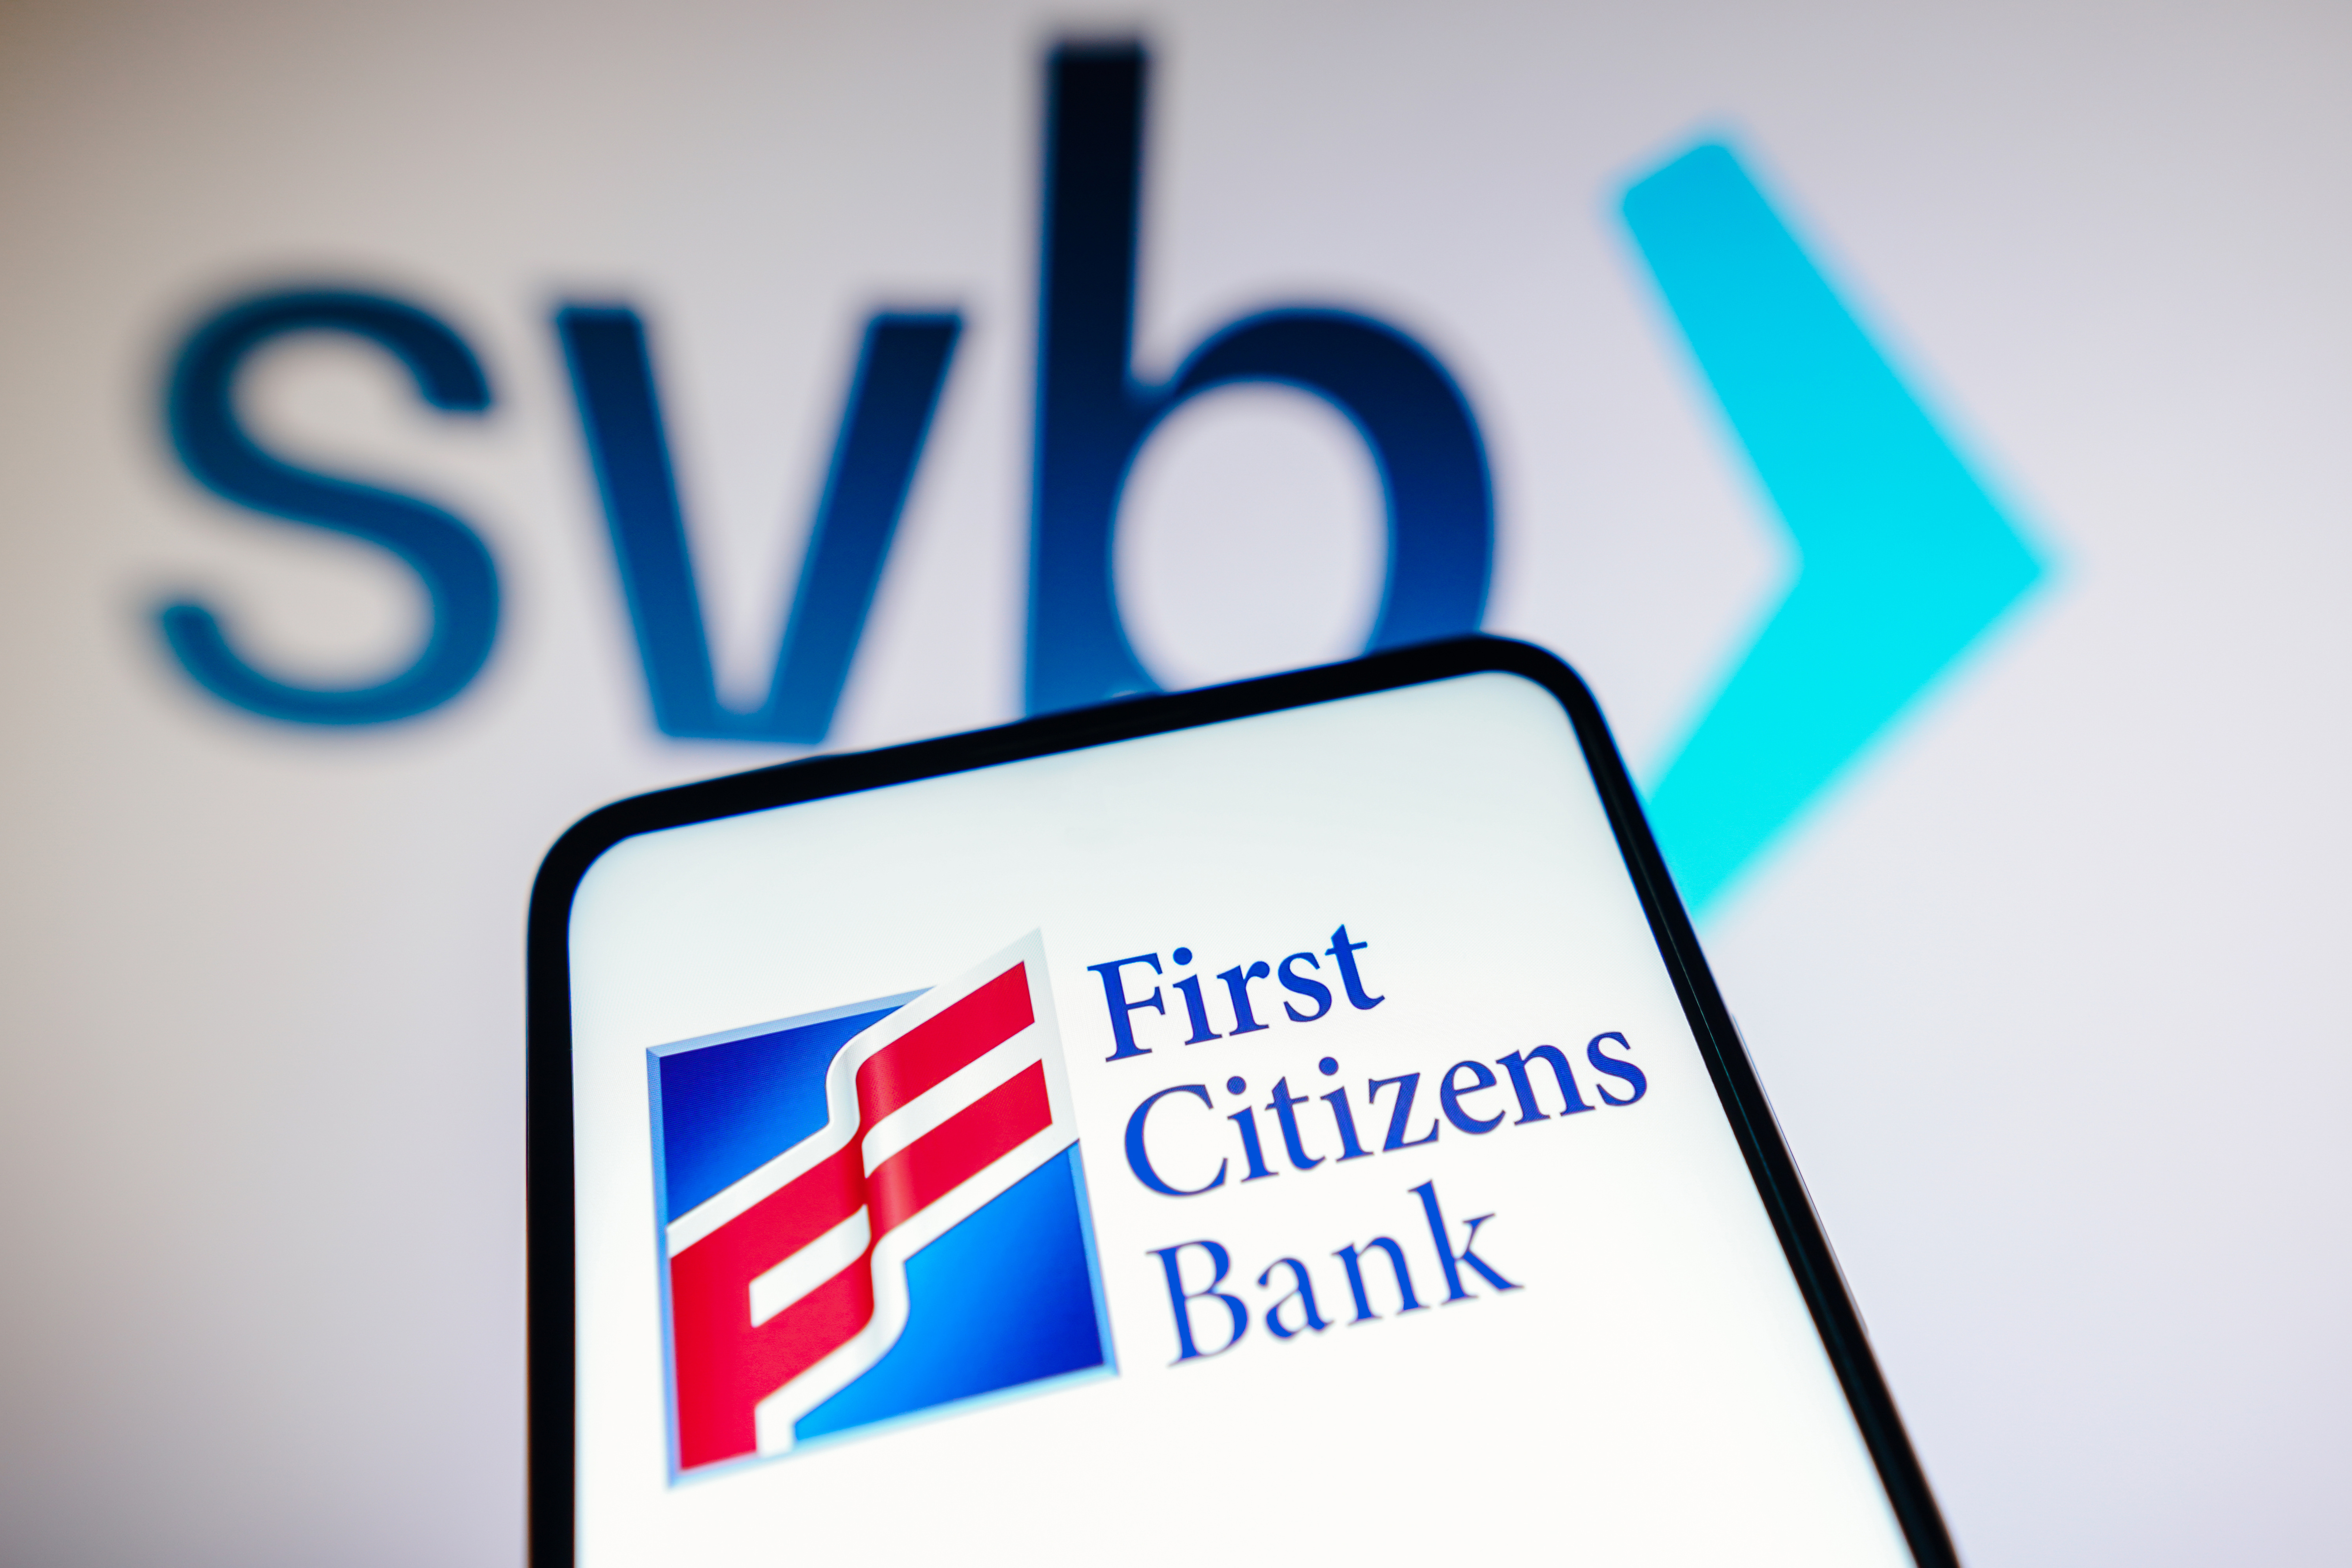 Silicon Valley Bank stock price and buyout plan with First Citizens Bank